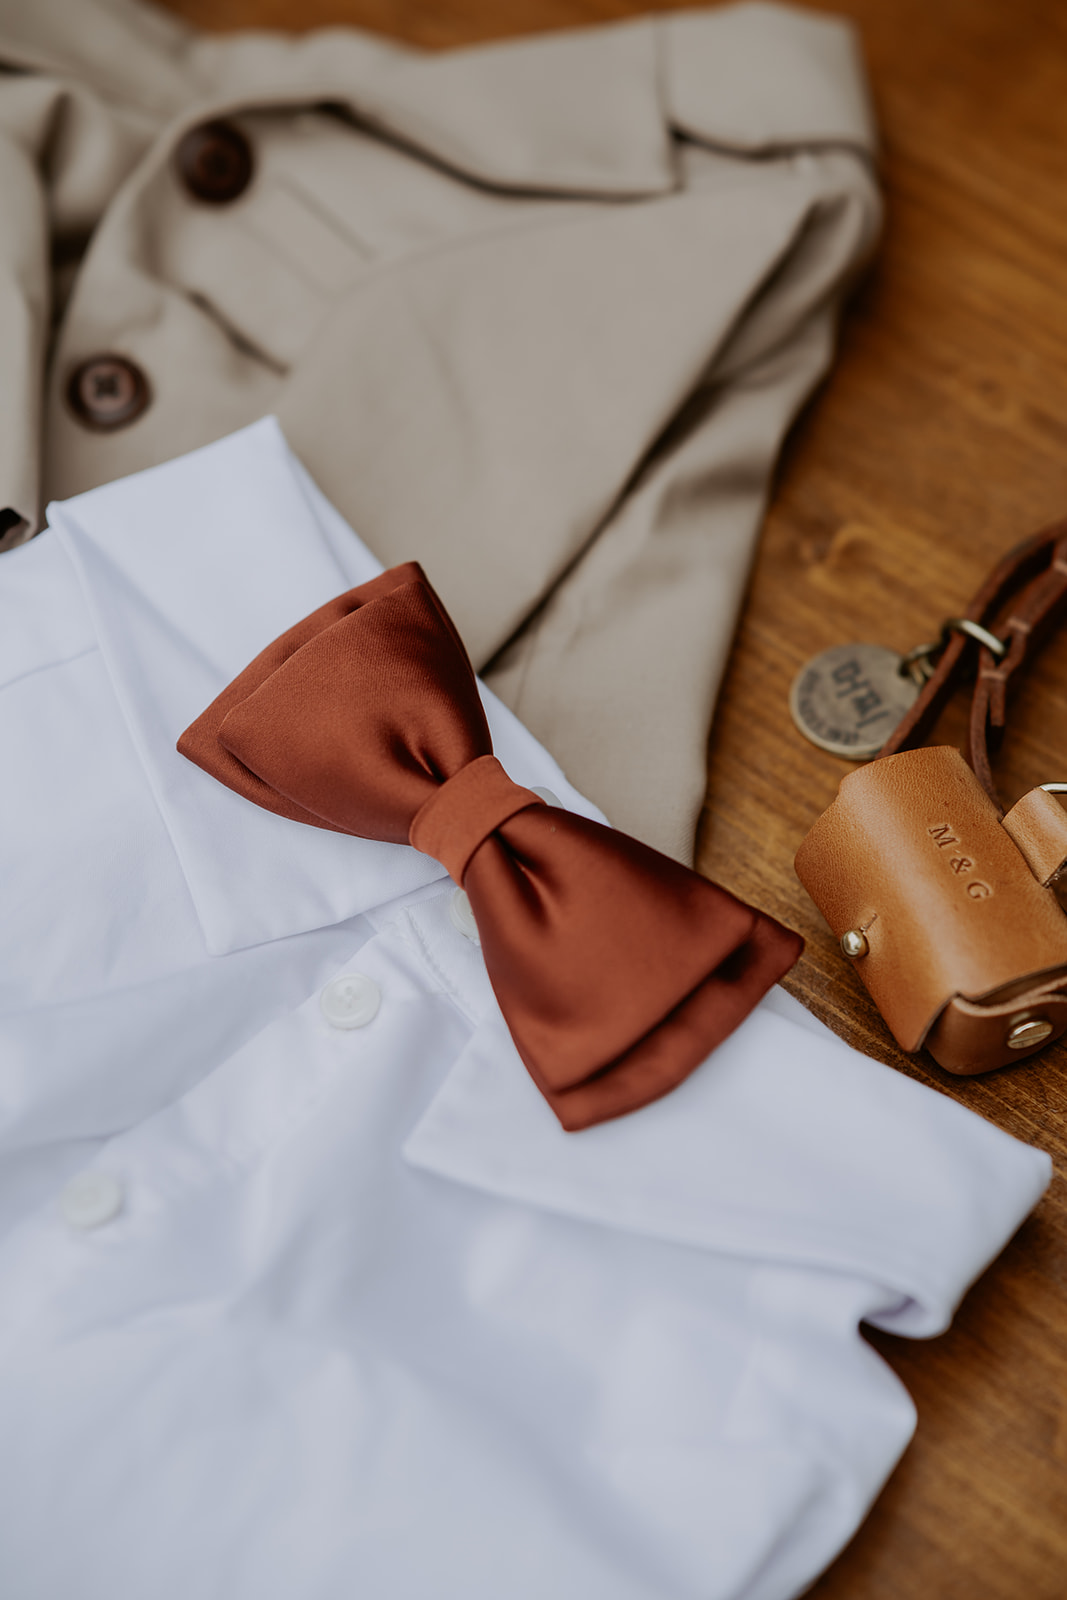 A brown bow tie rests on a white shirt with a beige jacket and tan leather accessories in the background.